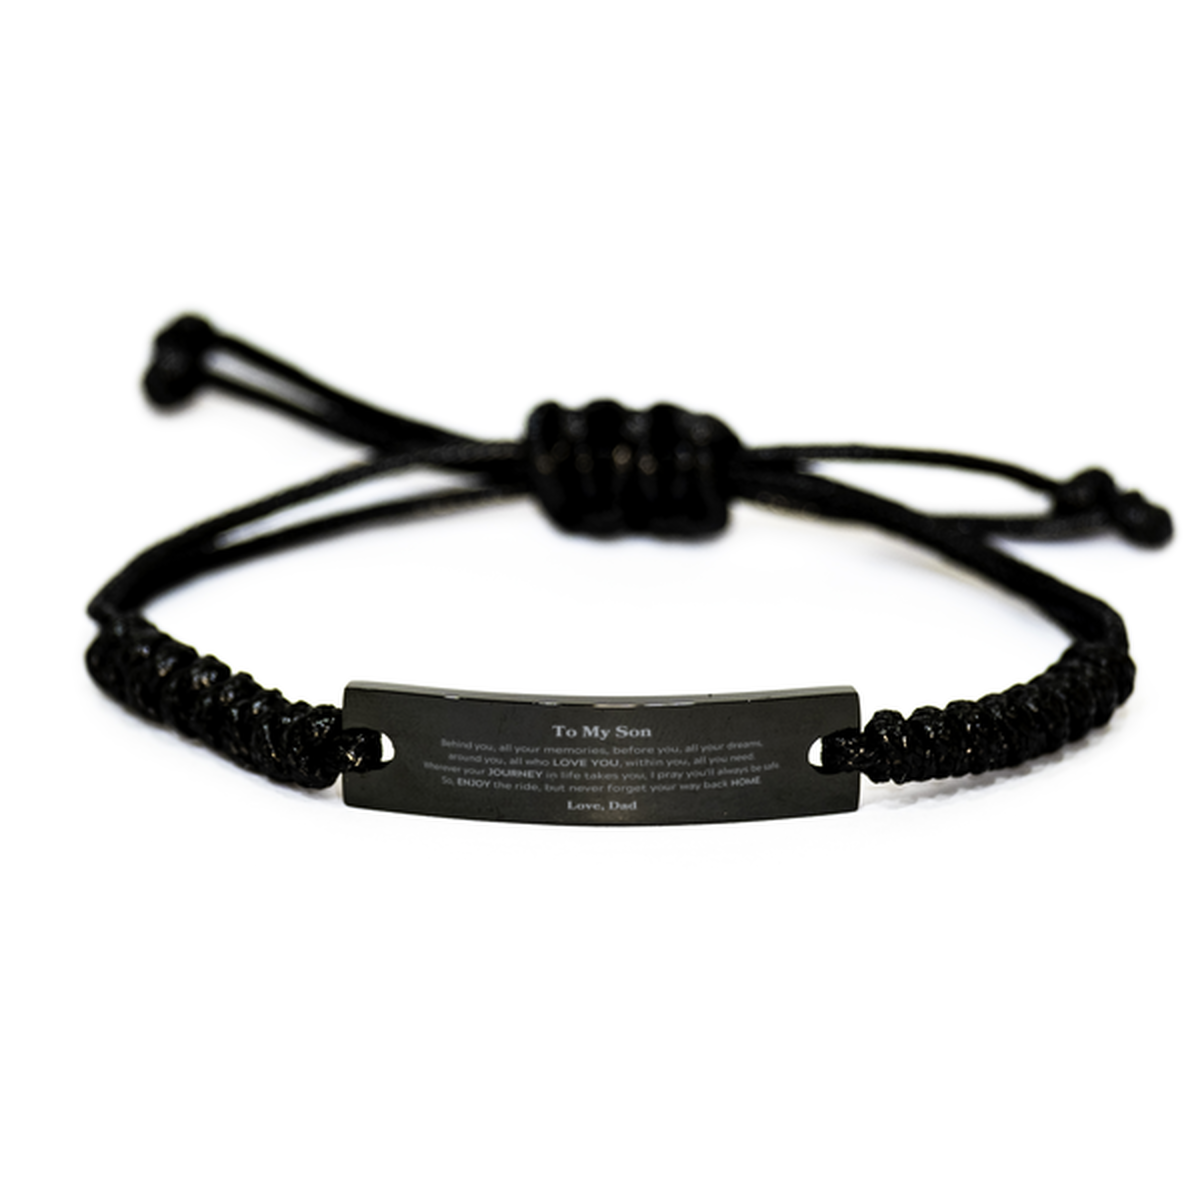 To My Son Graduation Gifts from Dad, Son Black Rope Bracelet Christmas Birthday Gifts for Son Behind you, all your memories, before you, all your dreams. Love, Dad